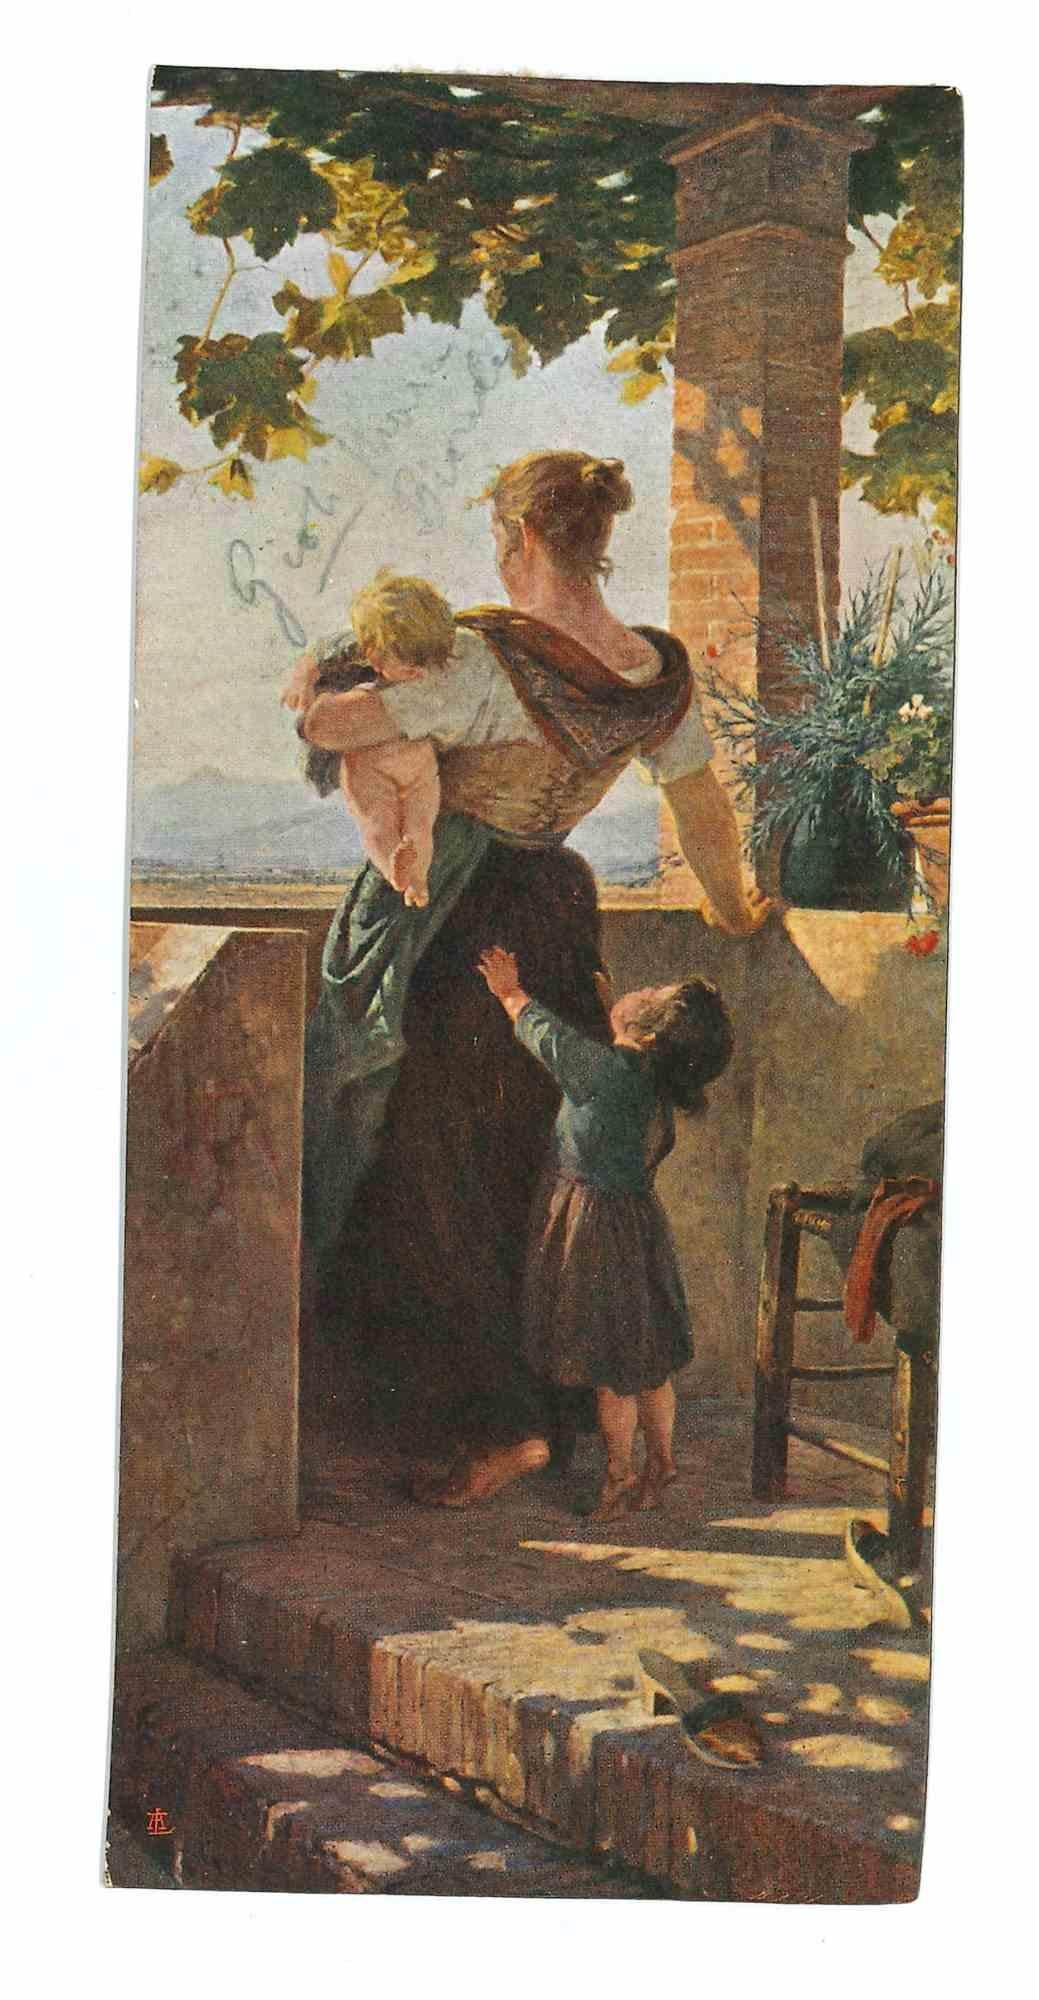 Unknown Portrait Photograph - Vintage Photo of Painting by F. Gioli - Mother and Children - Early 20th Century